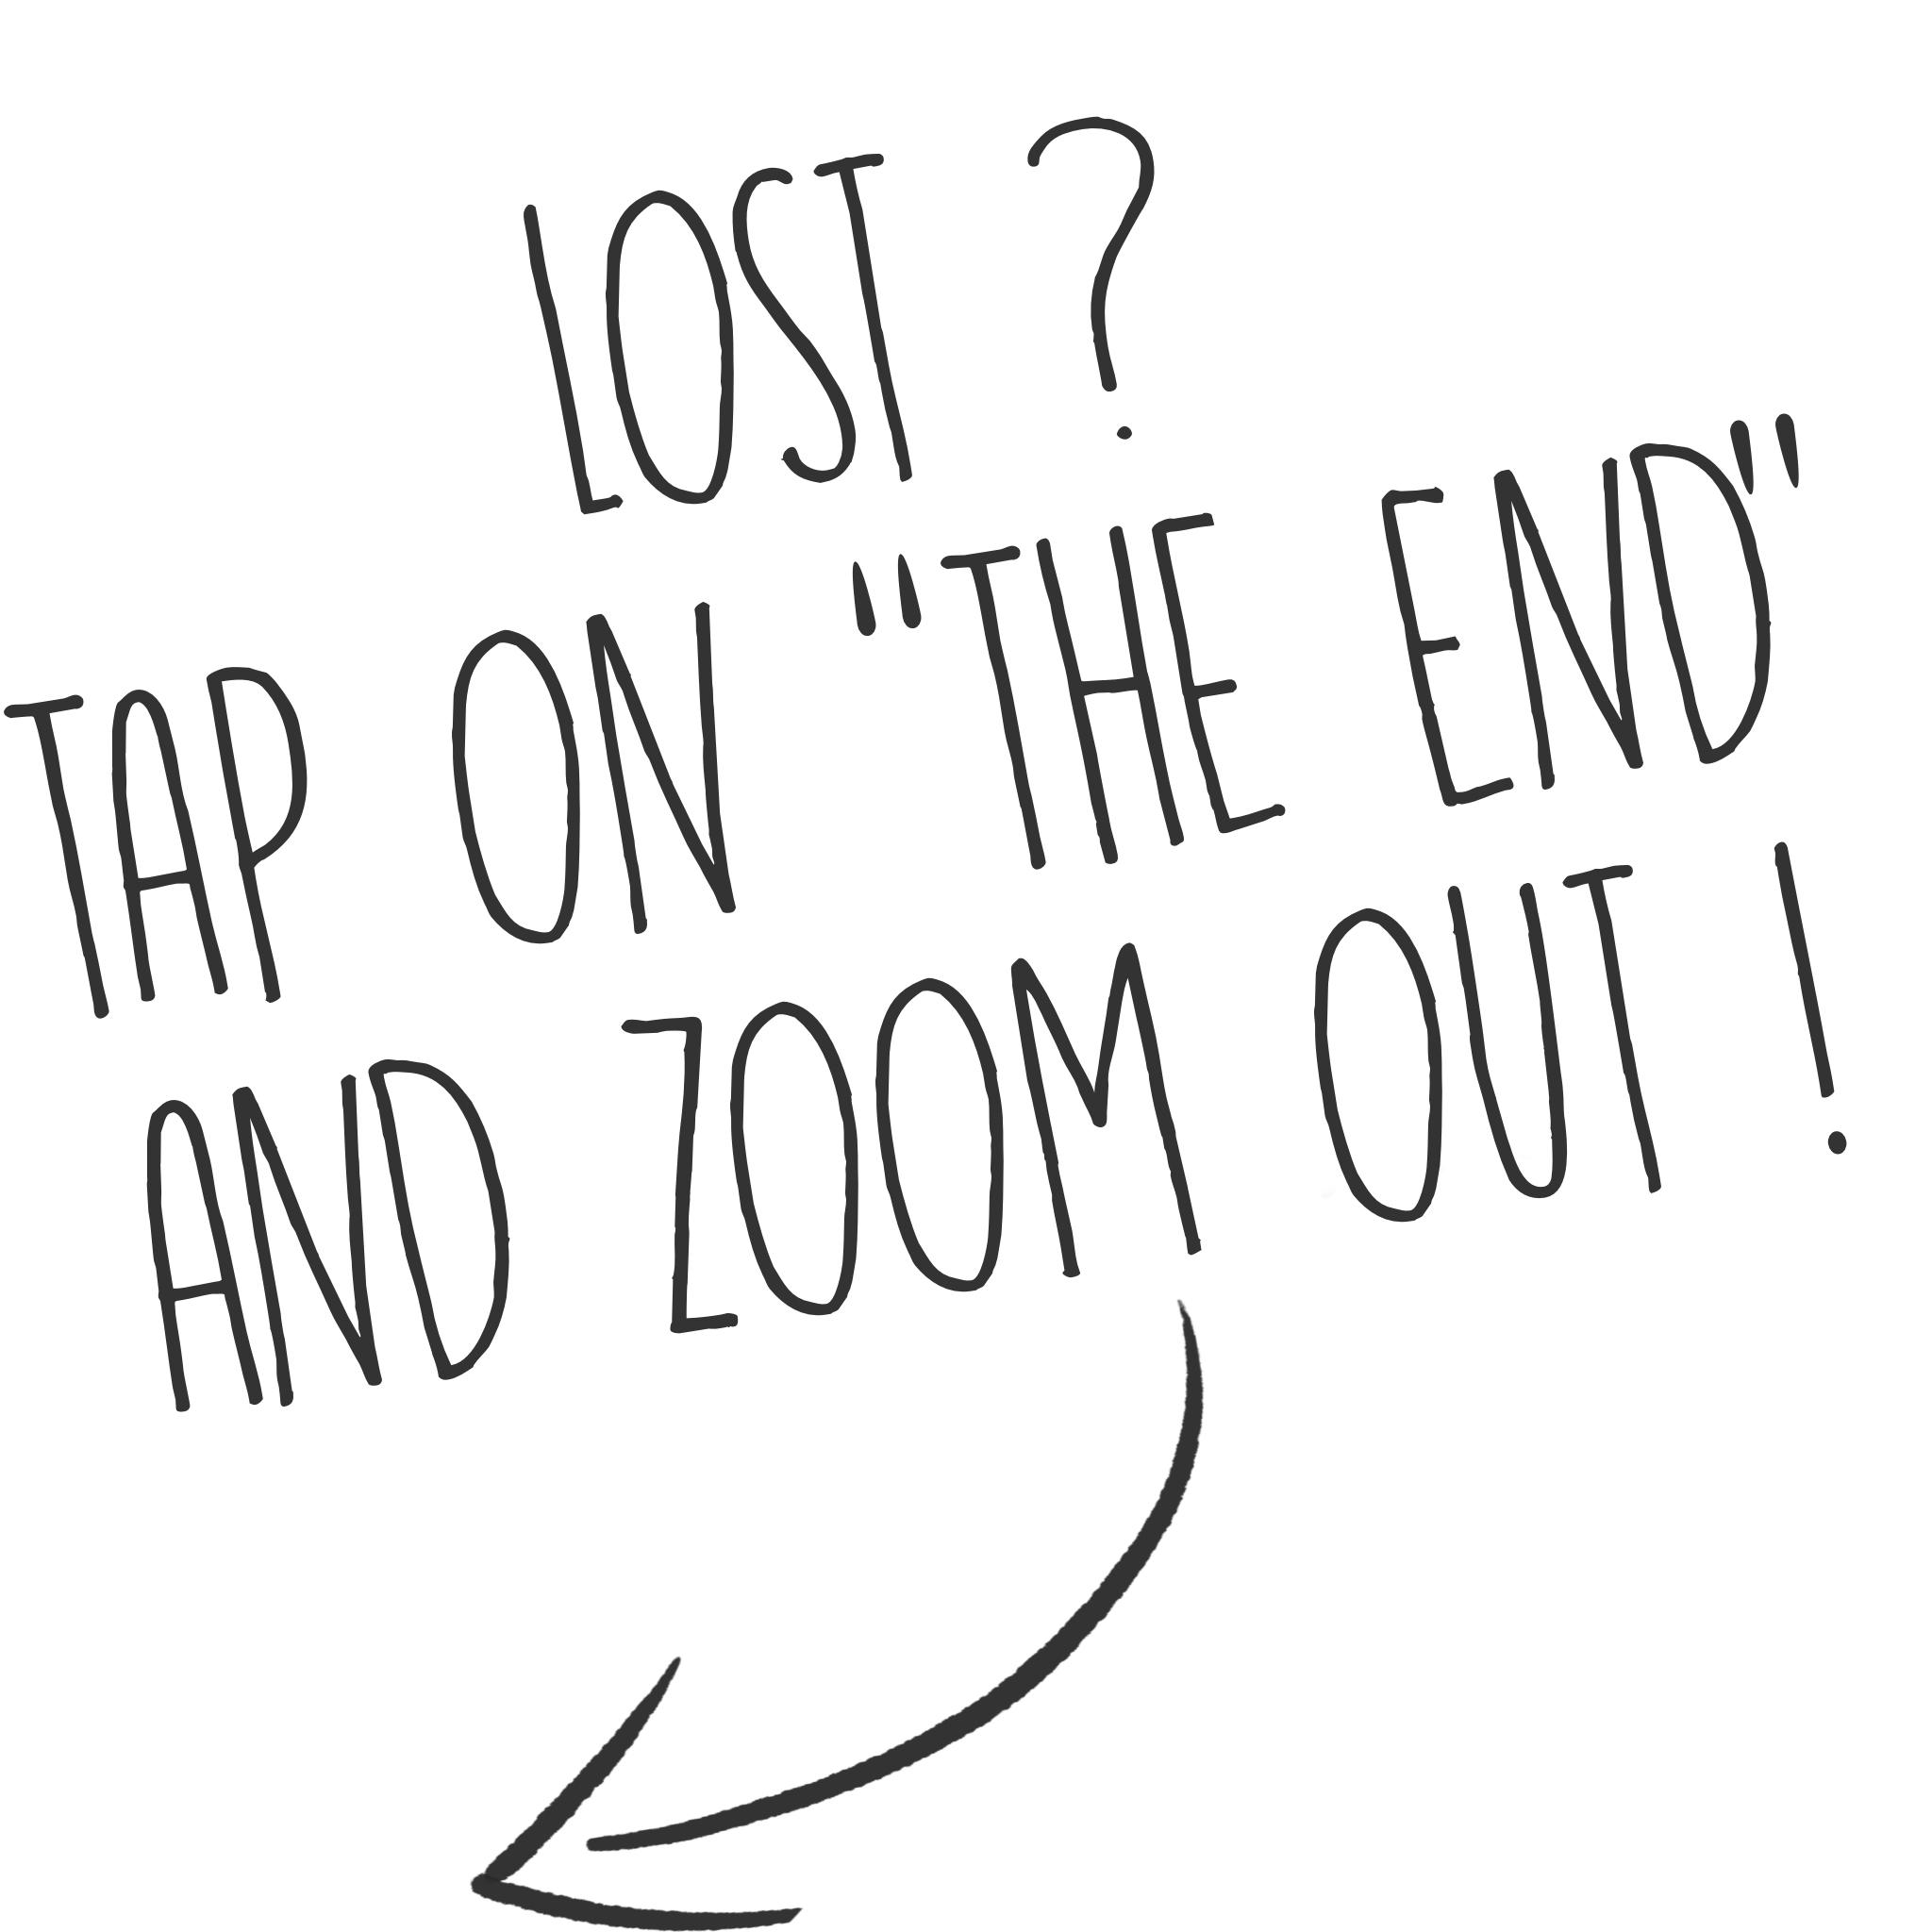 if you're lost, tap on the 'End' post-it and zoom out